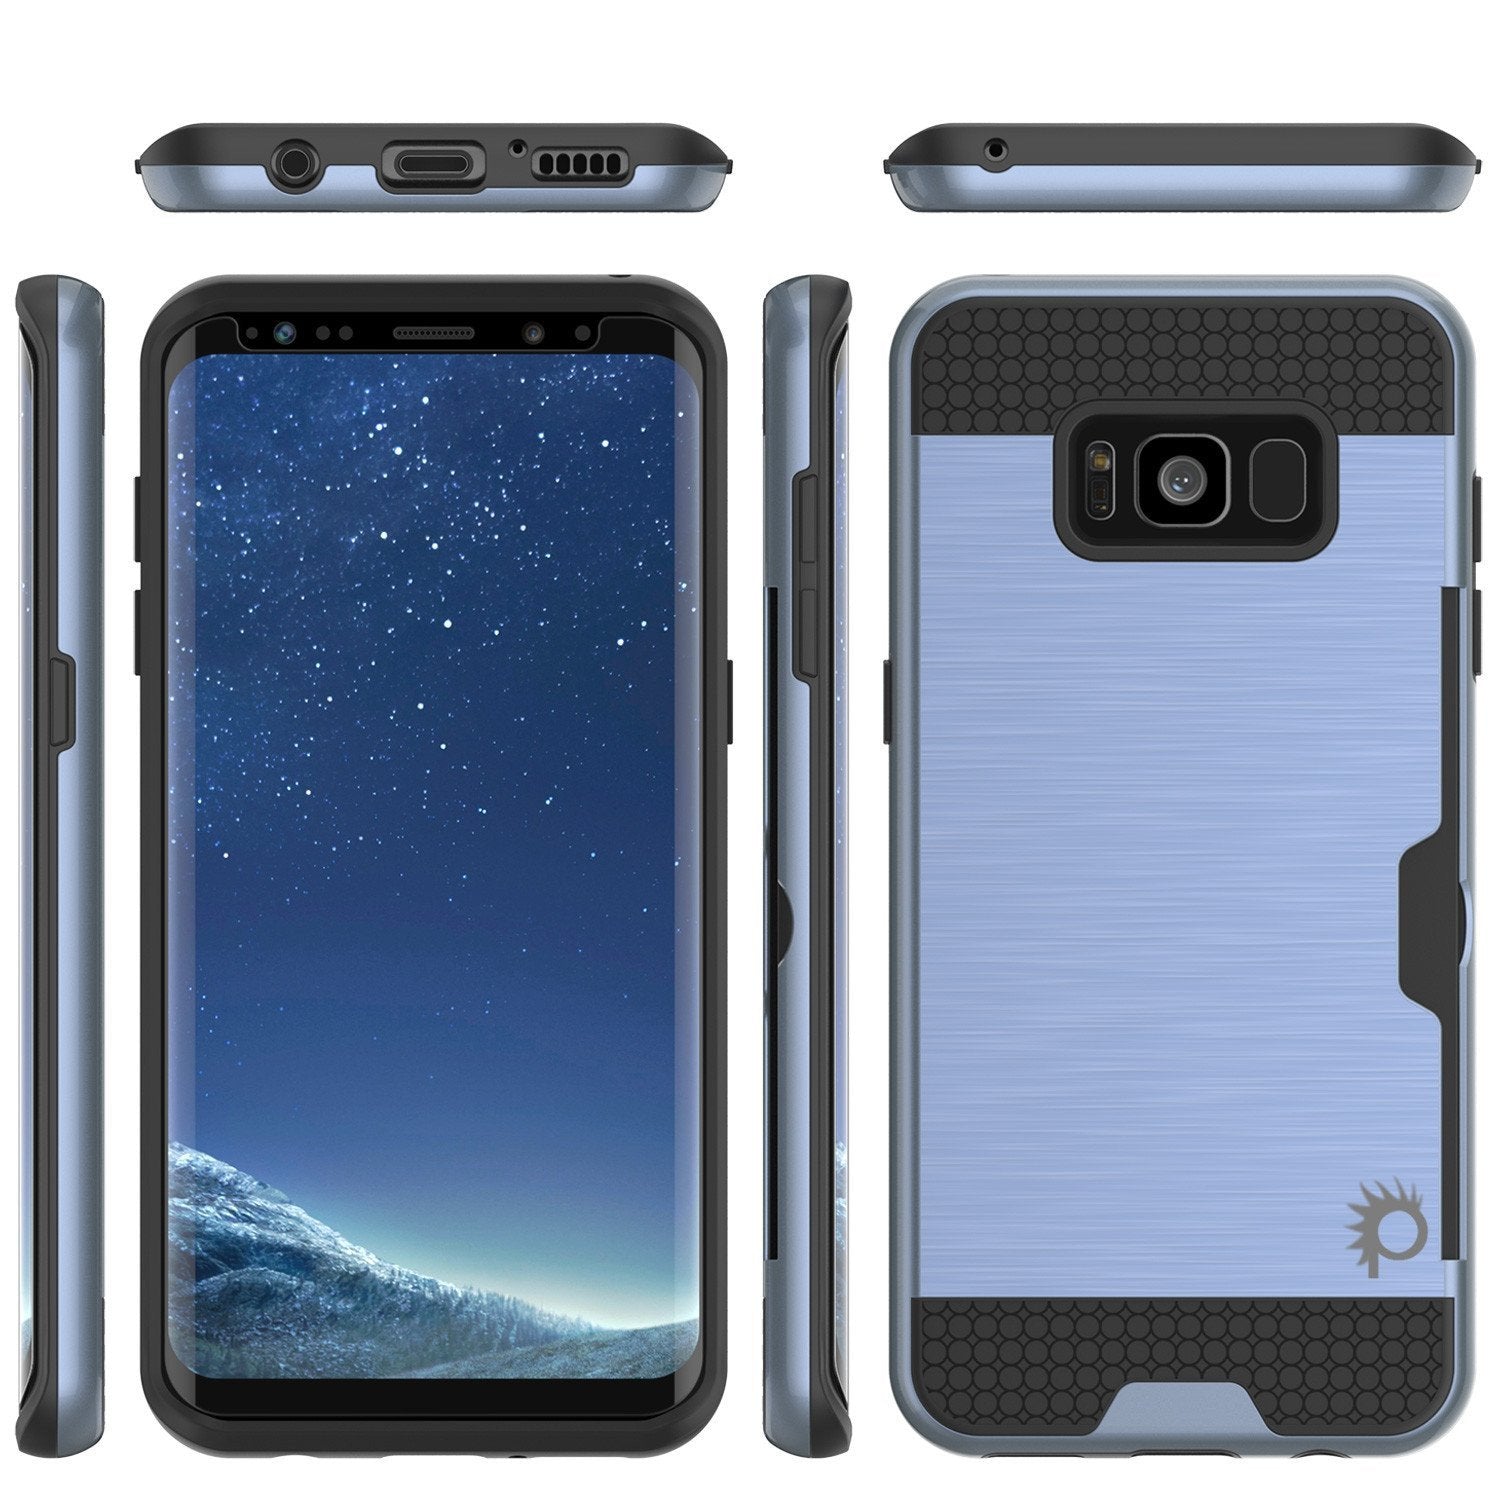 Galaxy S8 Plus Case, PUNKcase [SLOT Series] [Slim Fit] Dual-Layer Armor Cover w/Integrated Anti-Shock System, Credit Card Slot & PunkShield Screen Protector for Samsung Galaxy S8+ [Navy] - PunkCase NZ